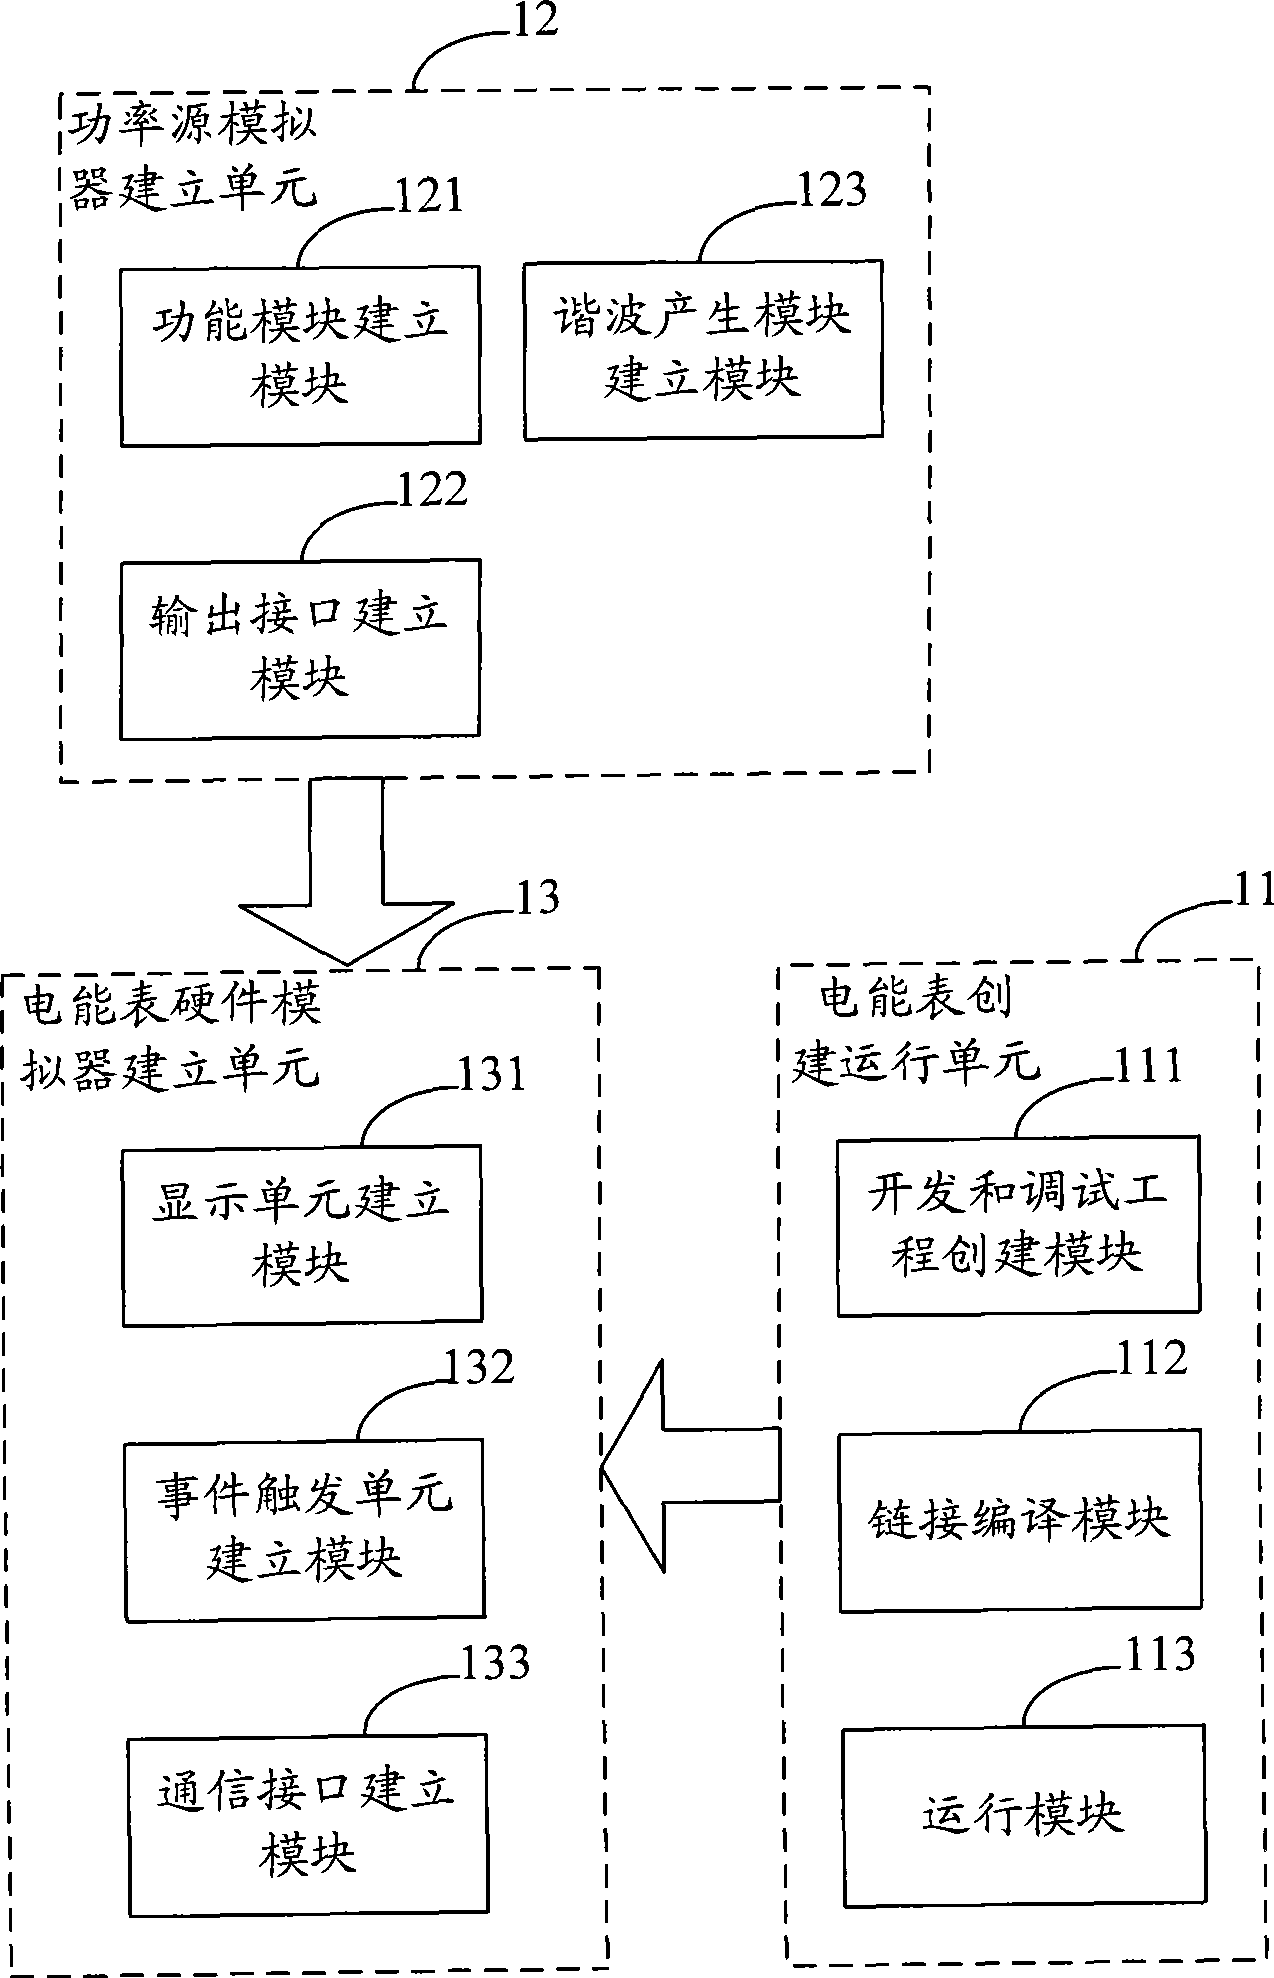 Method and system for developing and debugging electric energy meter software